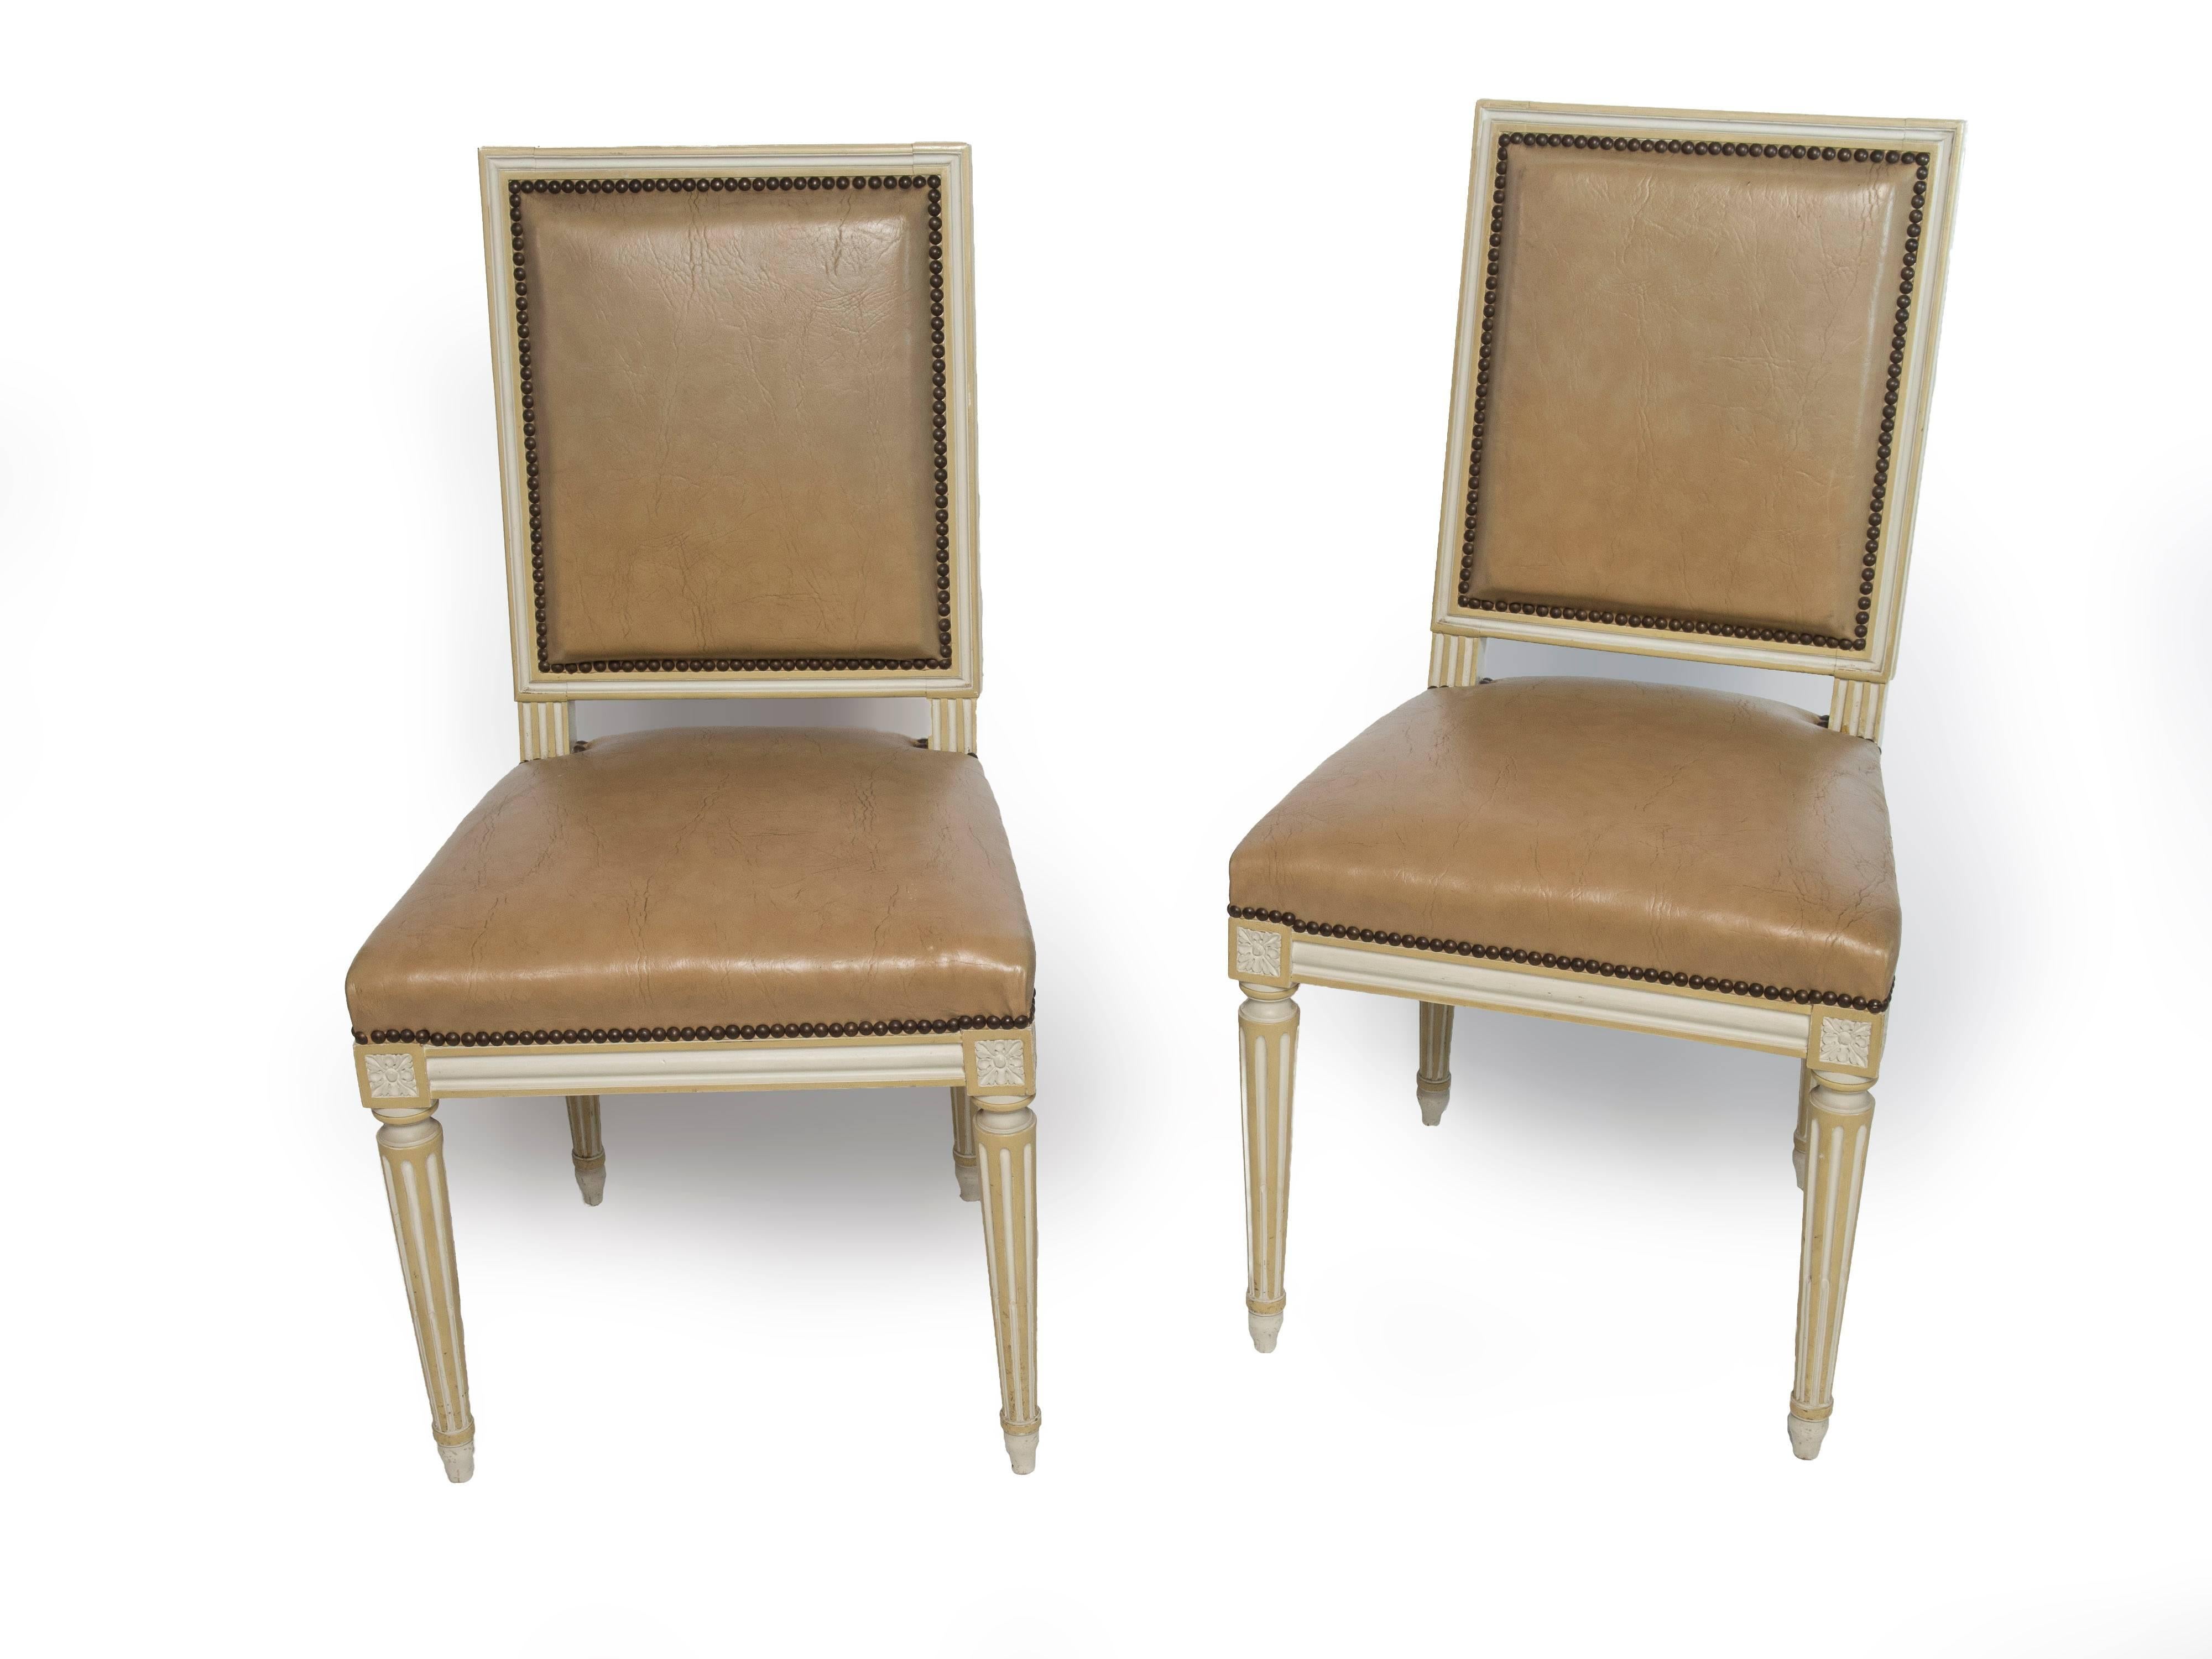 French Set of Four Square Back Louis XVI Dining Chairs Covered in a Tan Leather